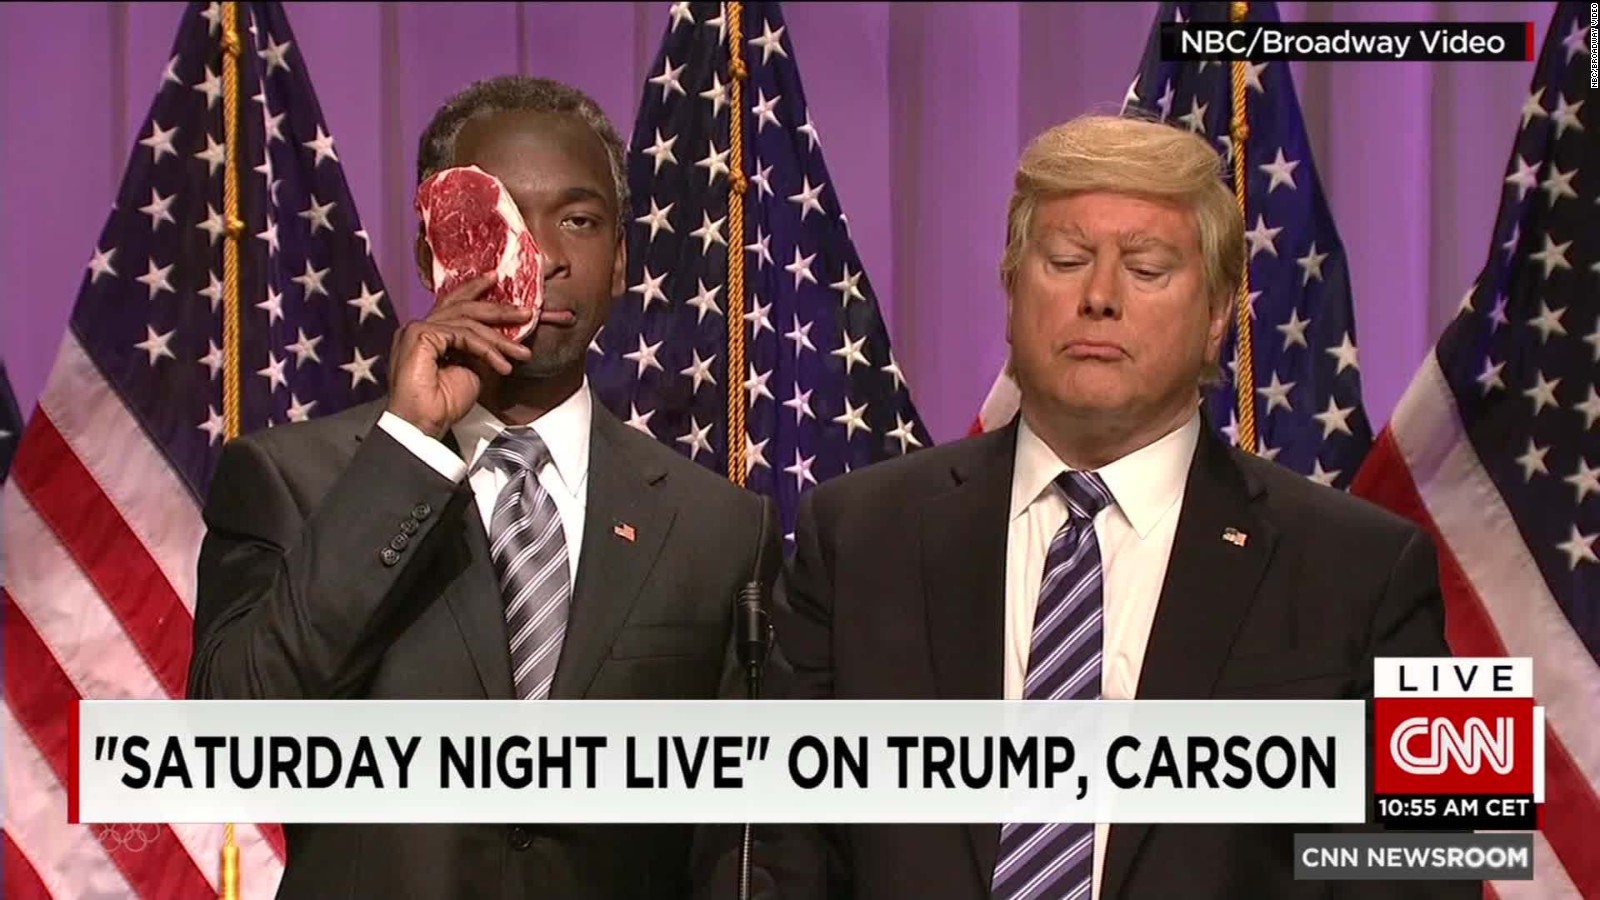 Snl Ben Carson Roughed Up At Trump Rally Cnn Video